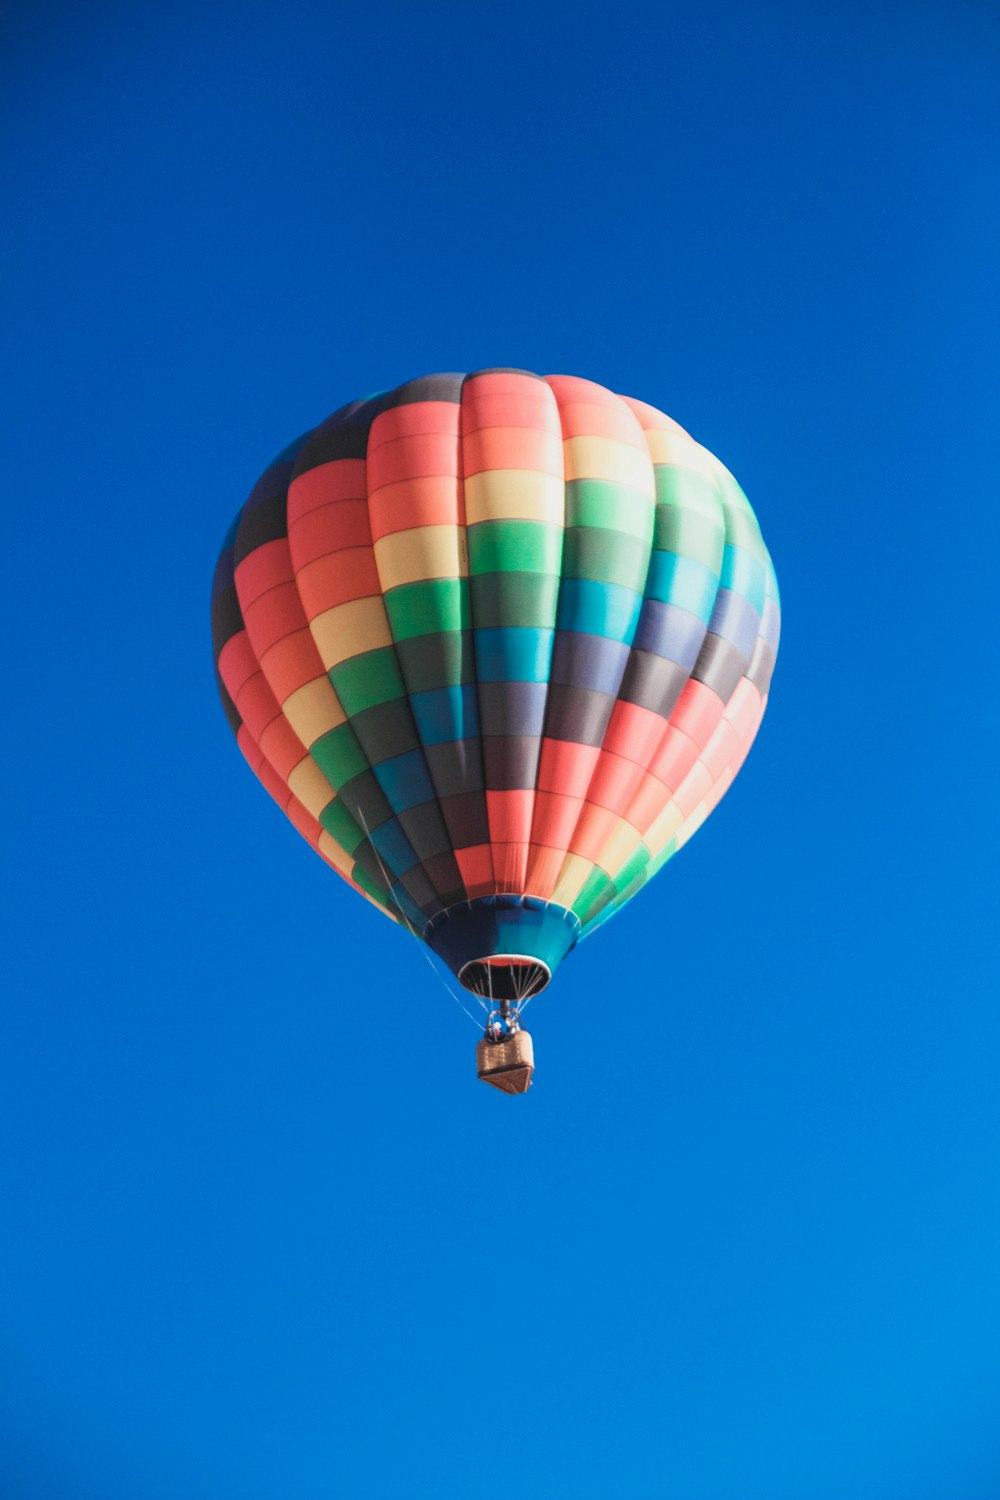 worm's eye view photography of multicolored hot air balloon